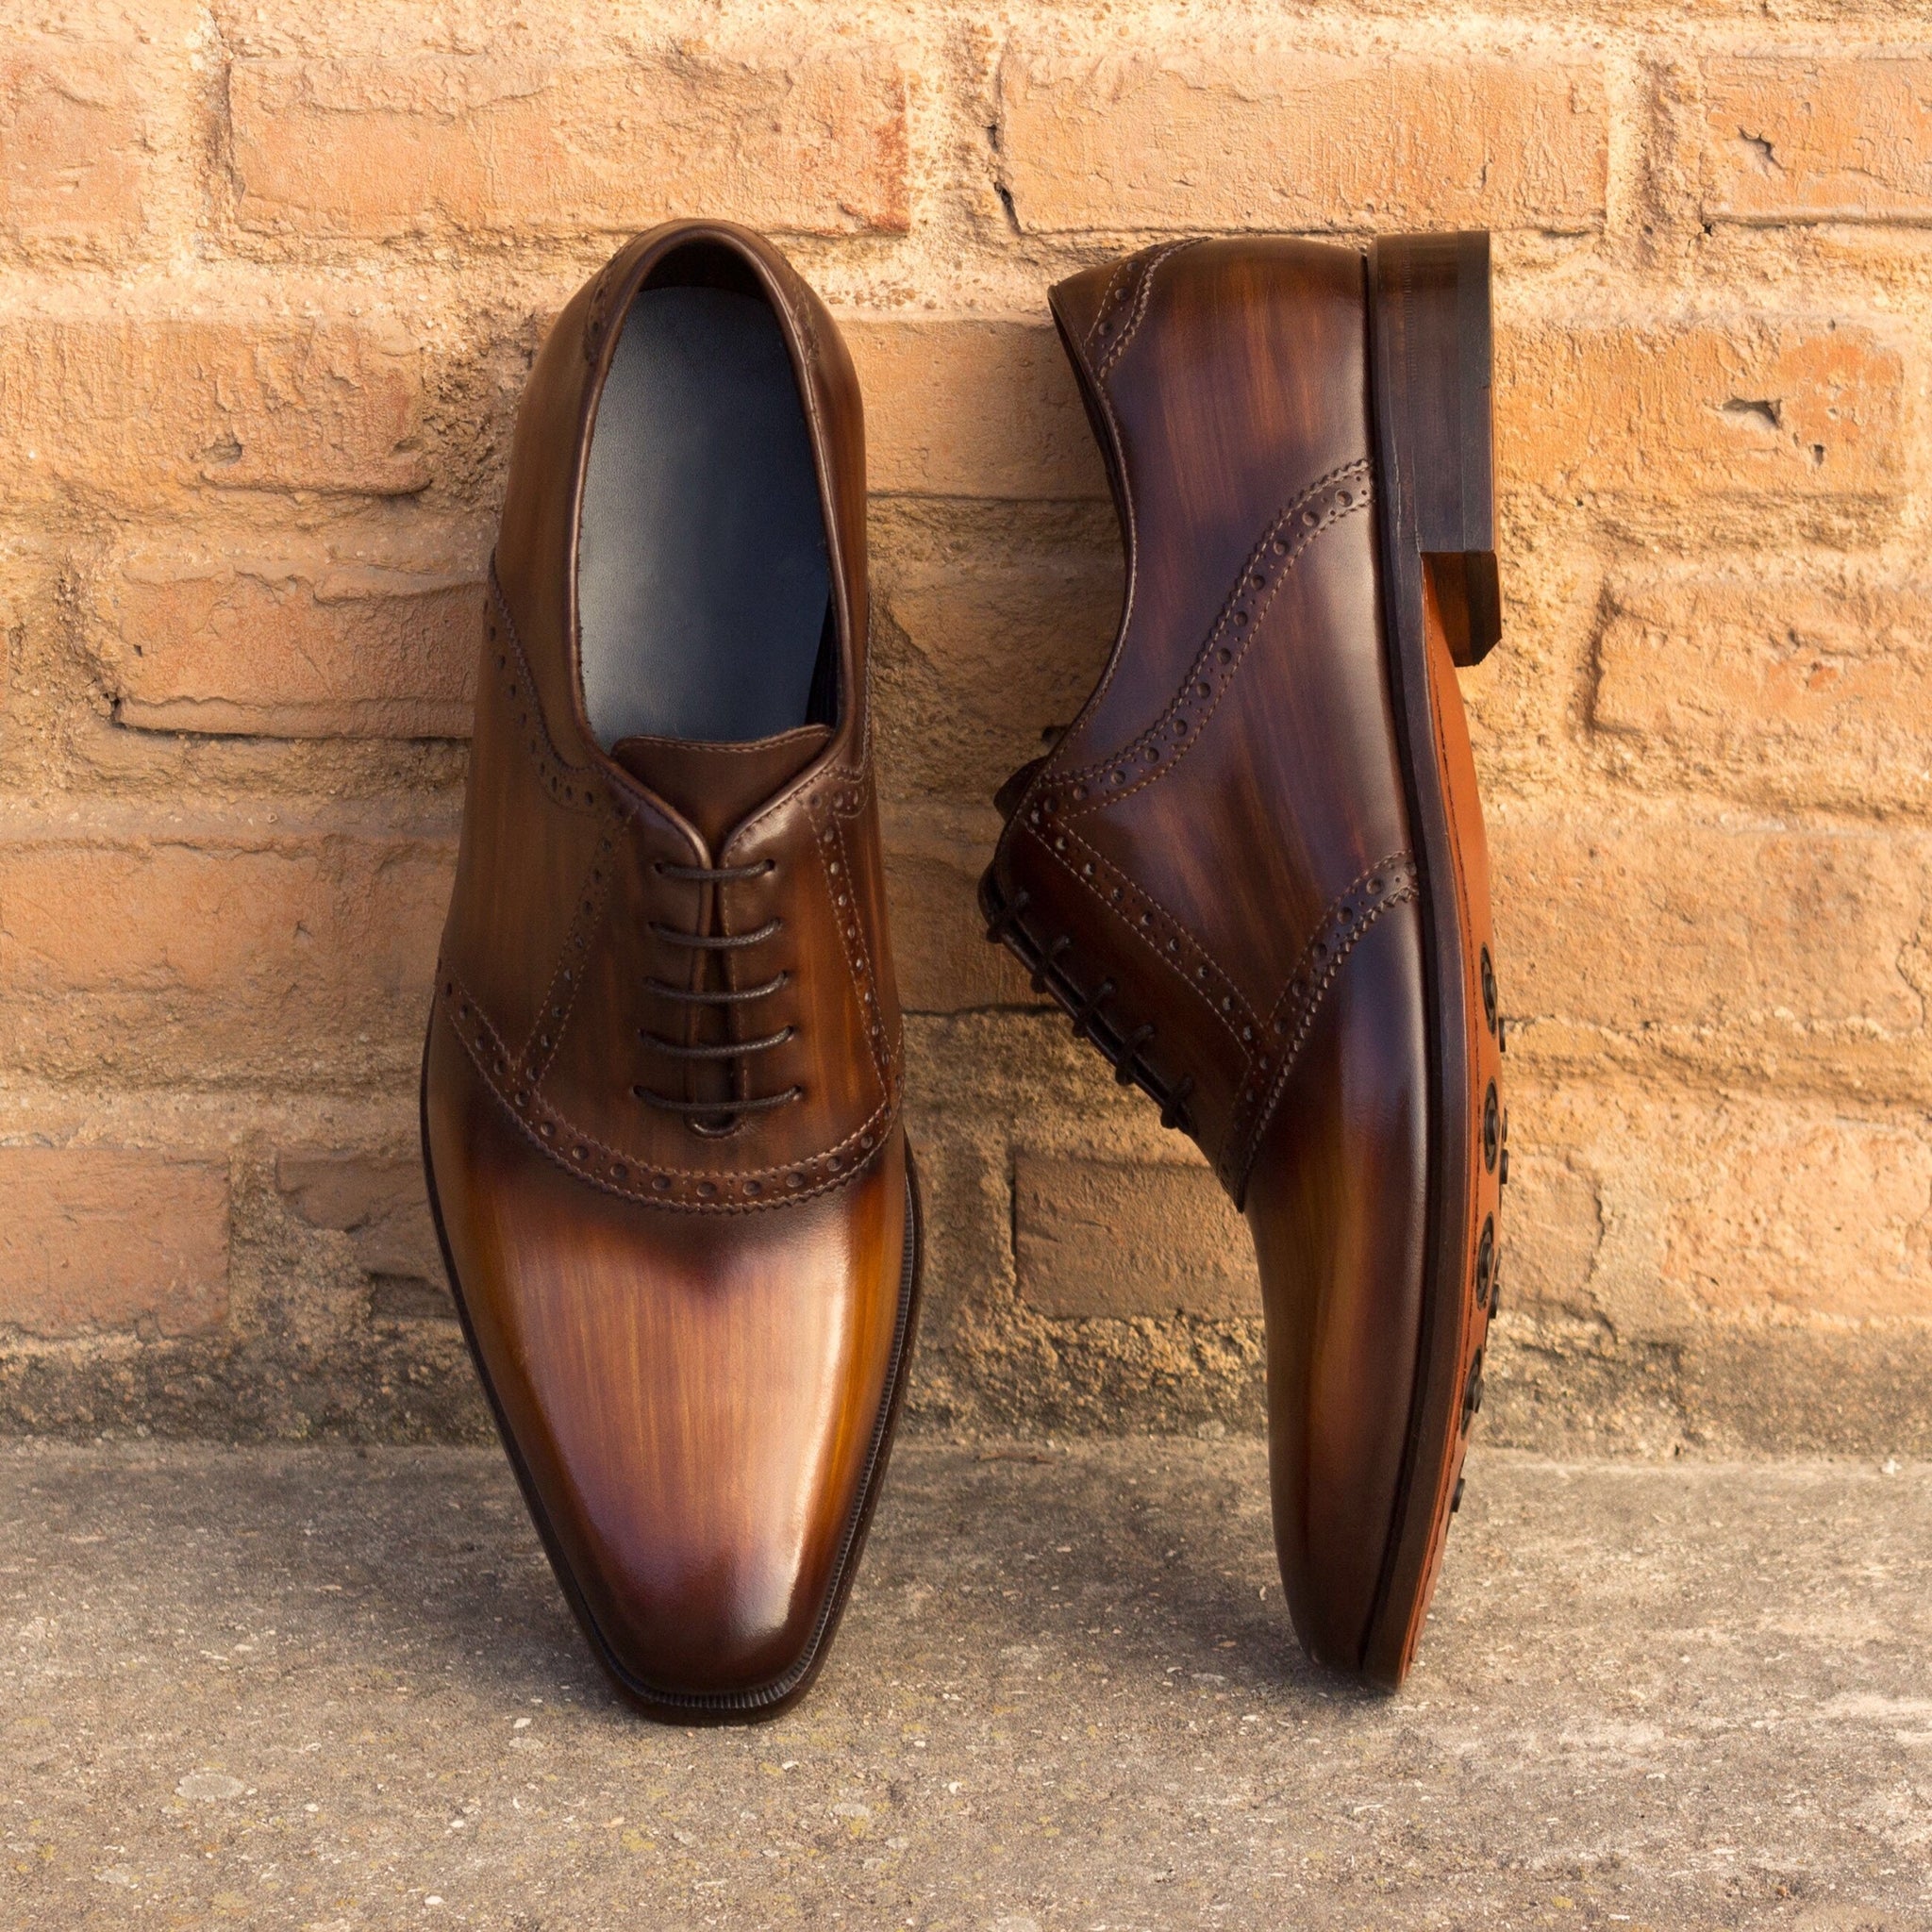 DAMIE - Unique Handcrafted Brown Patina Oxford